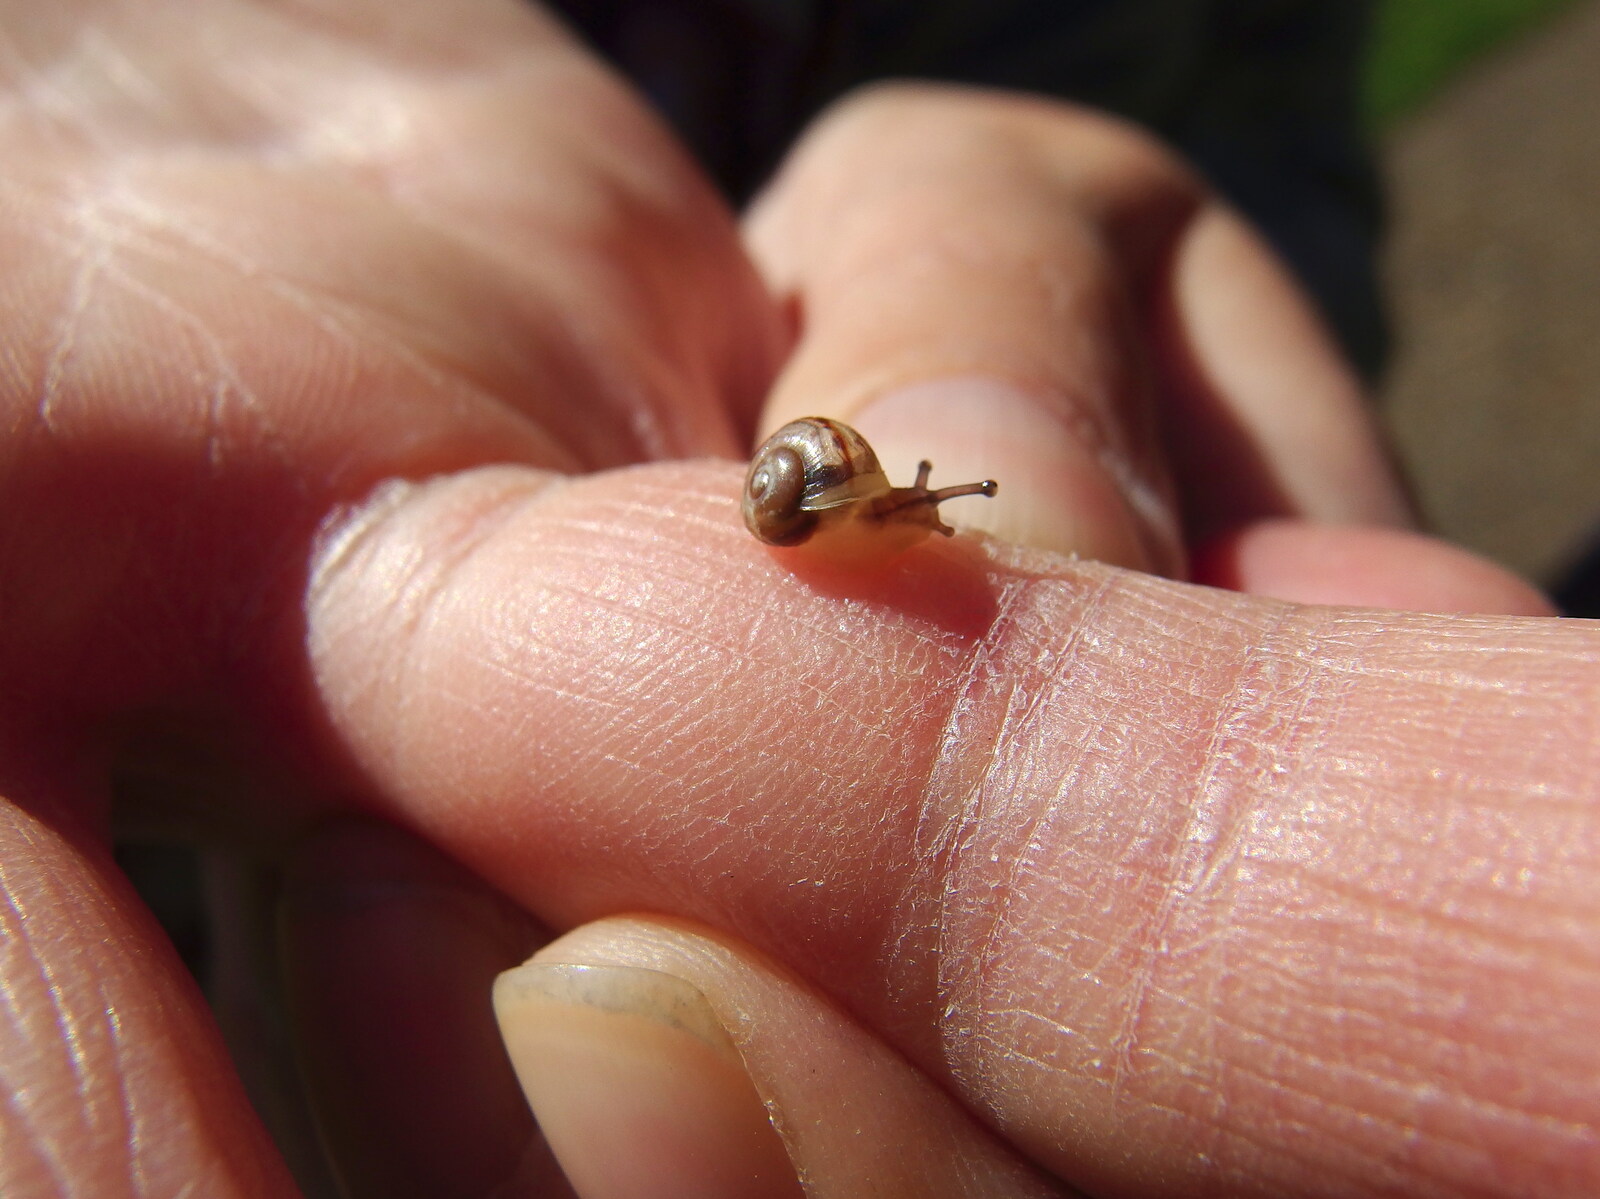 A teeny-tiny snail slides around from A Walk Around Thornham, and Jacqui Dankworth, Bungay, Suffolk - 6th October 2013